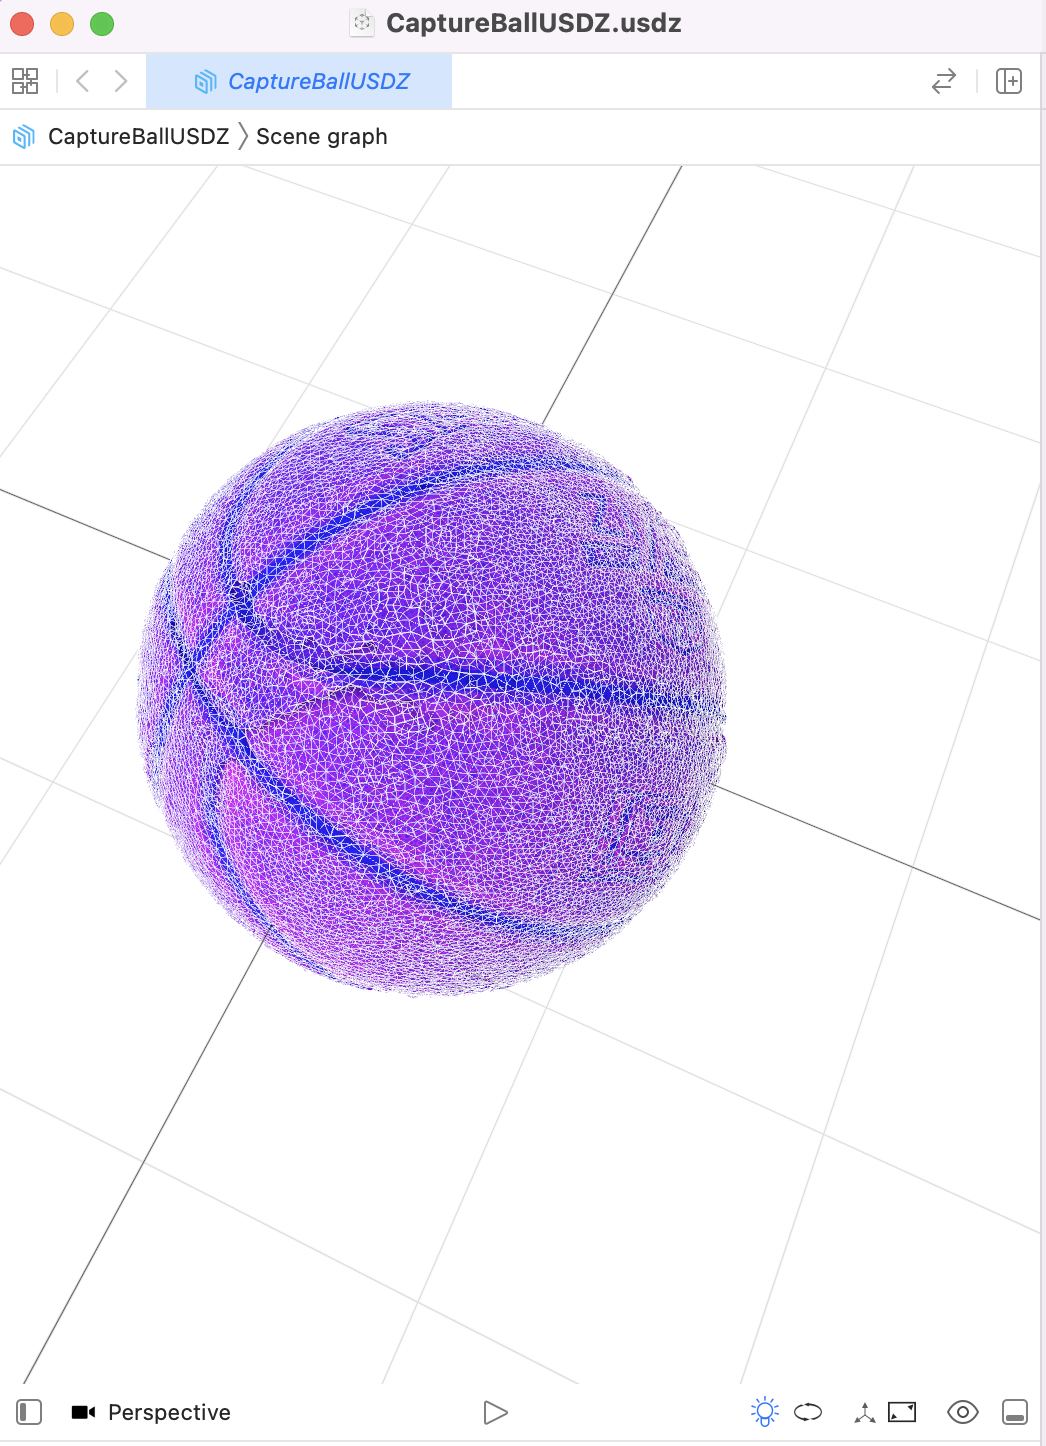 3D mesh of the basketball